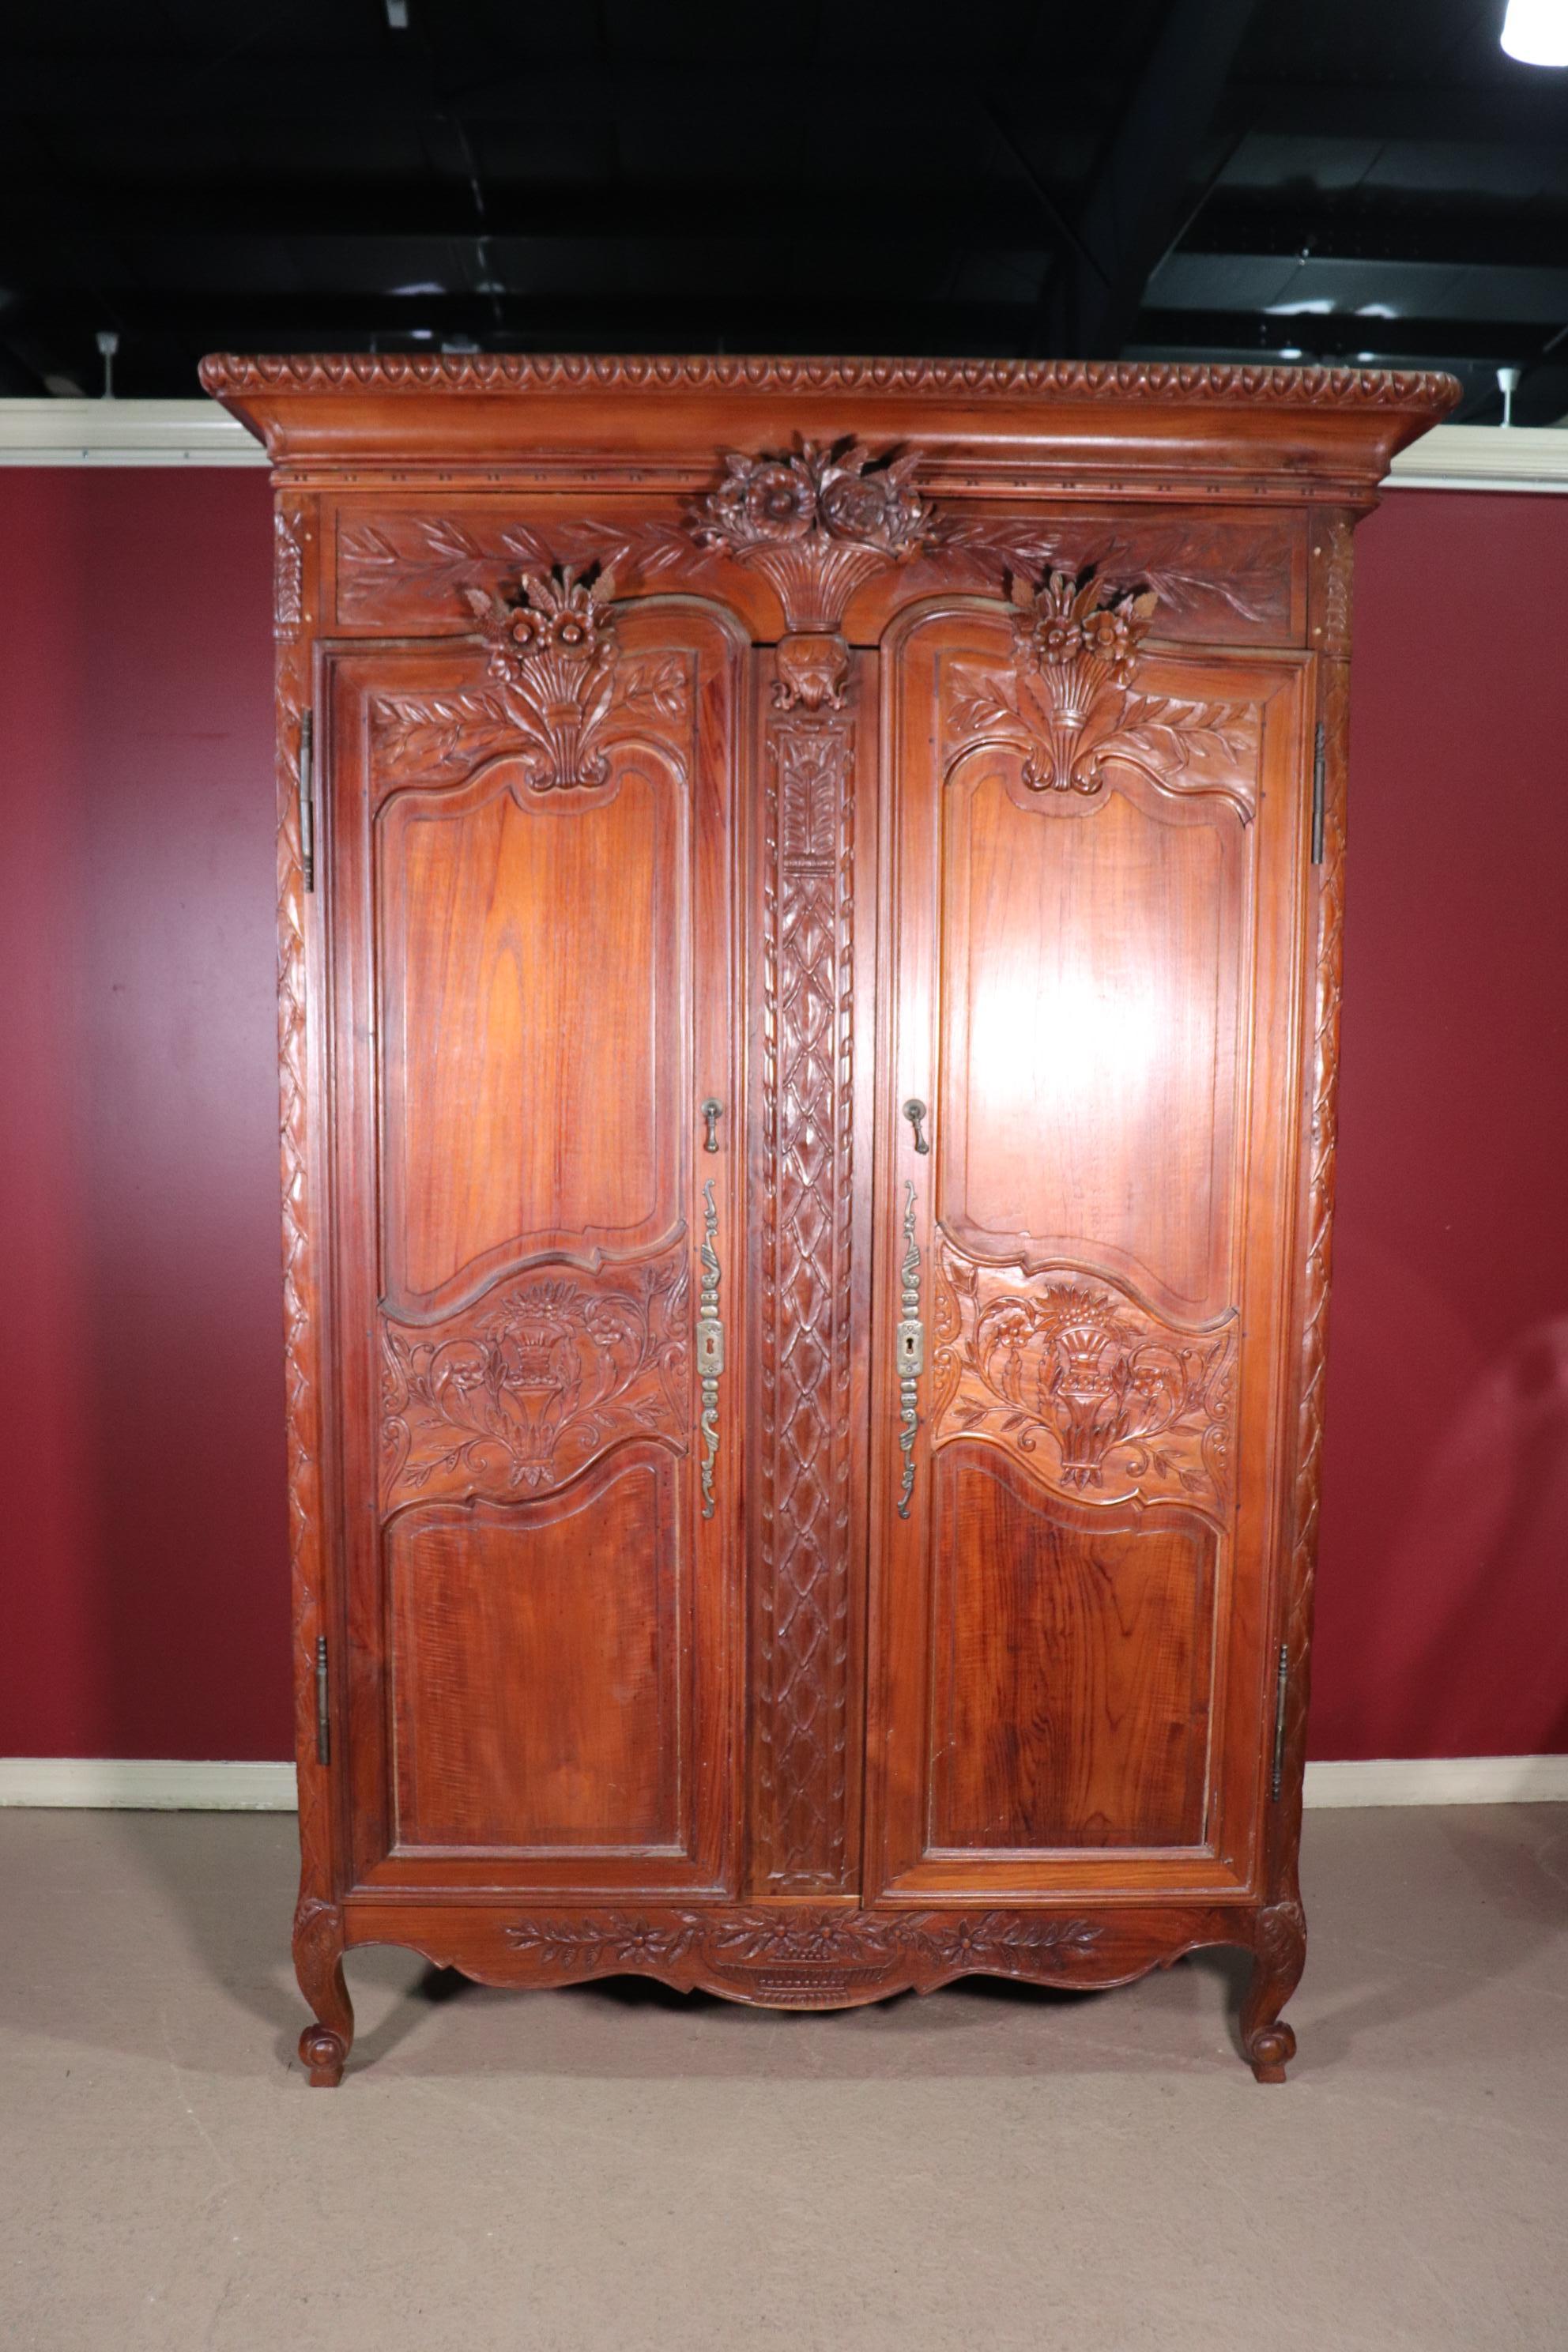 This is a beautifully made 1990s era solid teak French Louis XV style country armoire with excellent design and carving. The armoire is reminiscent of antique French wedding armoires from the 1700s era. The armoire is in good condition and measures